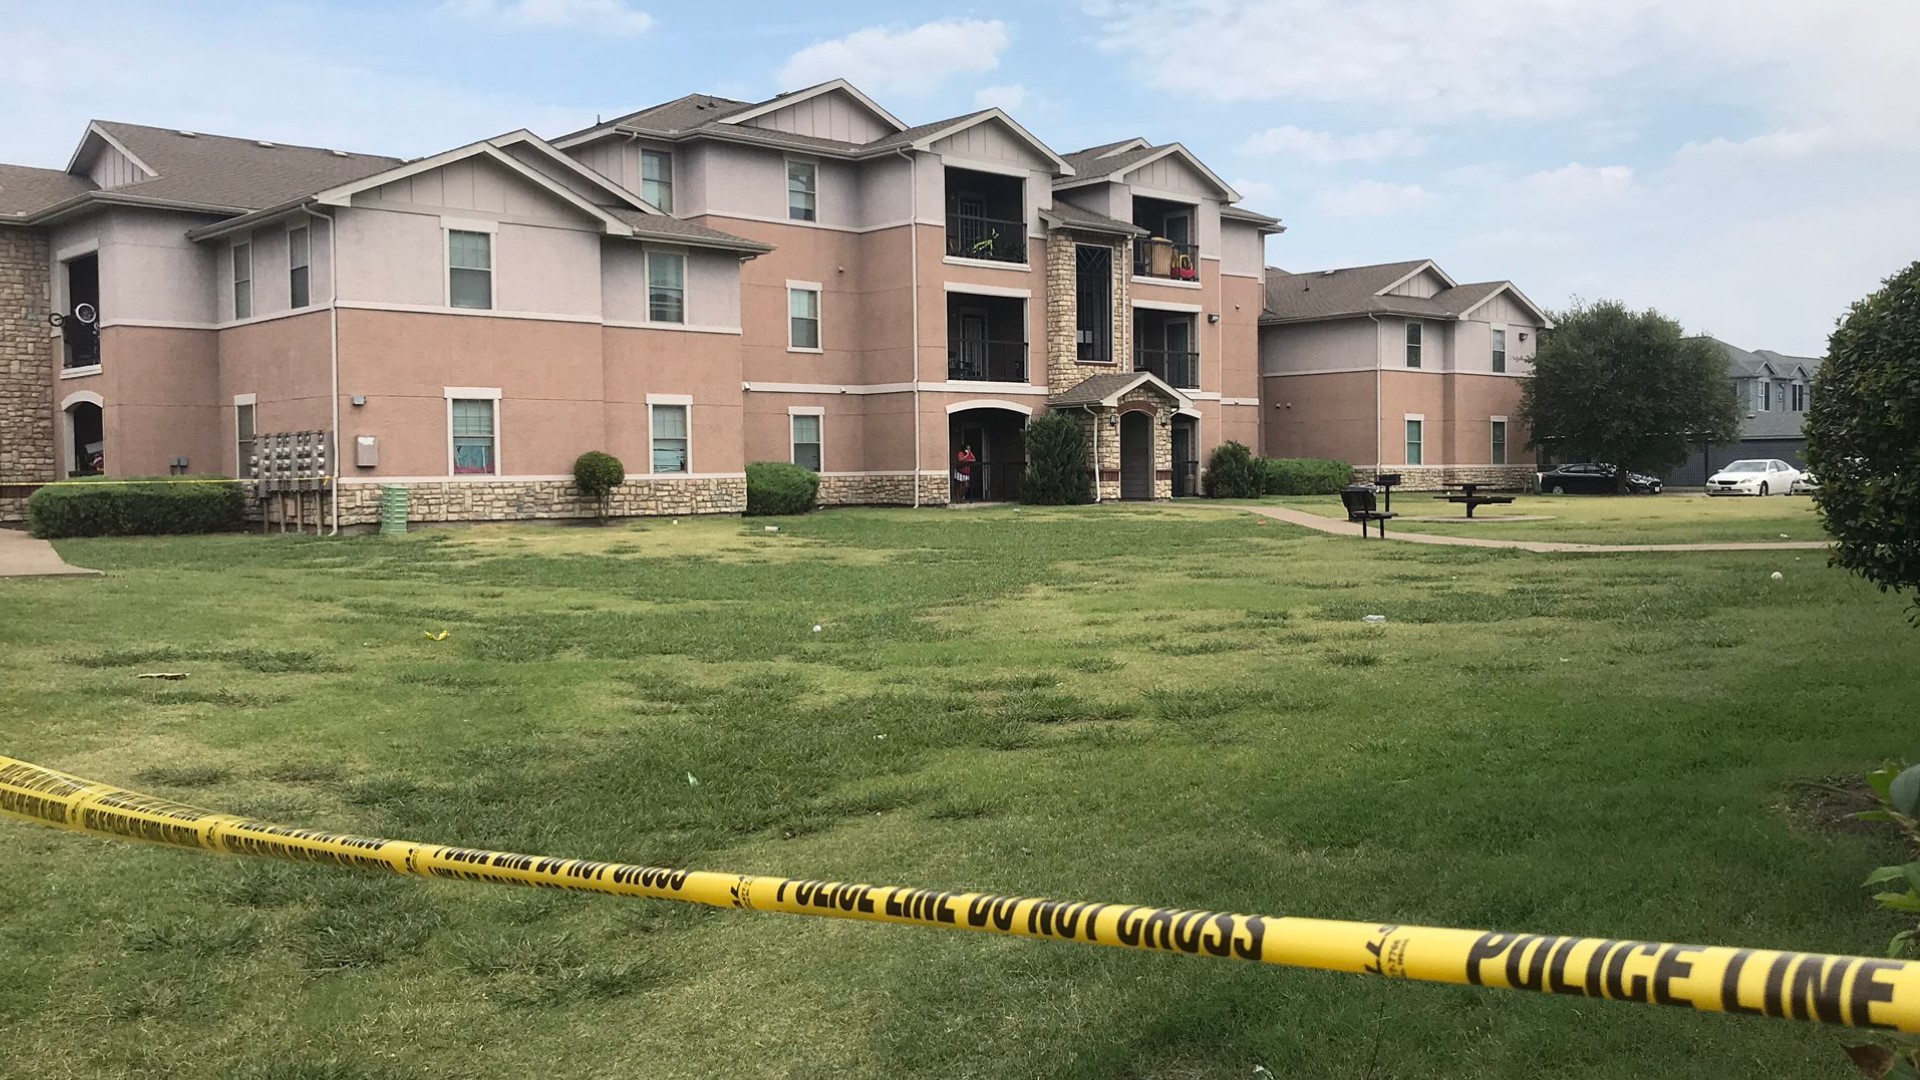 A man was taken into police custody after he called an alarm company to say he had killed his family at a Far East Dallas apartment complex.